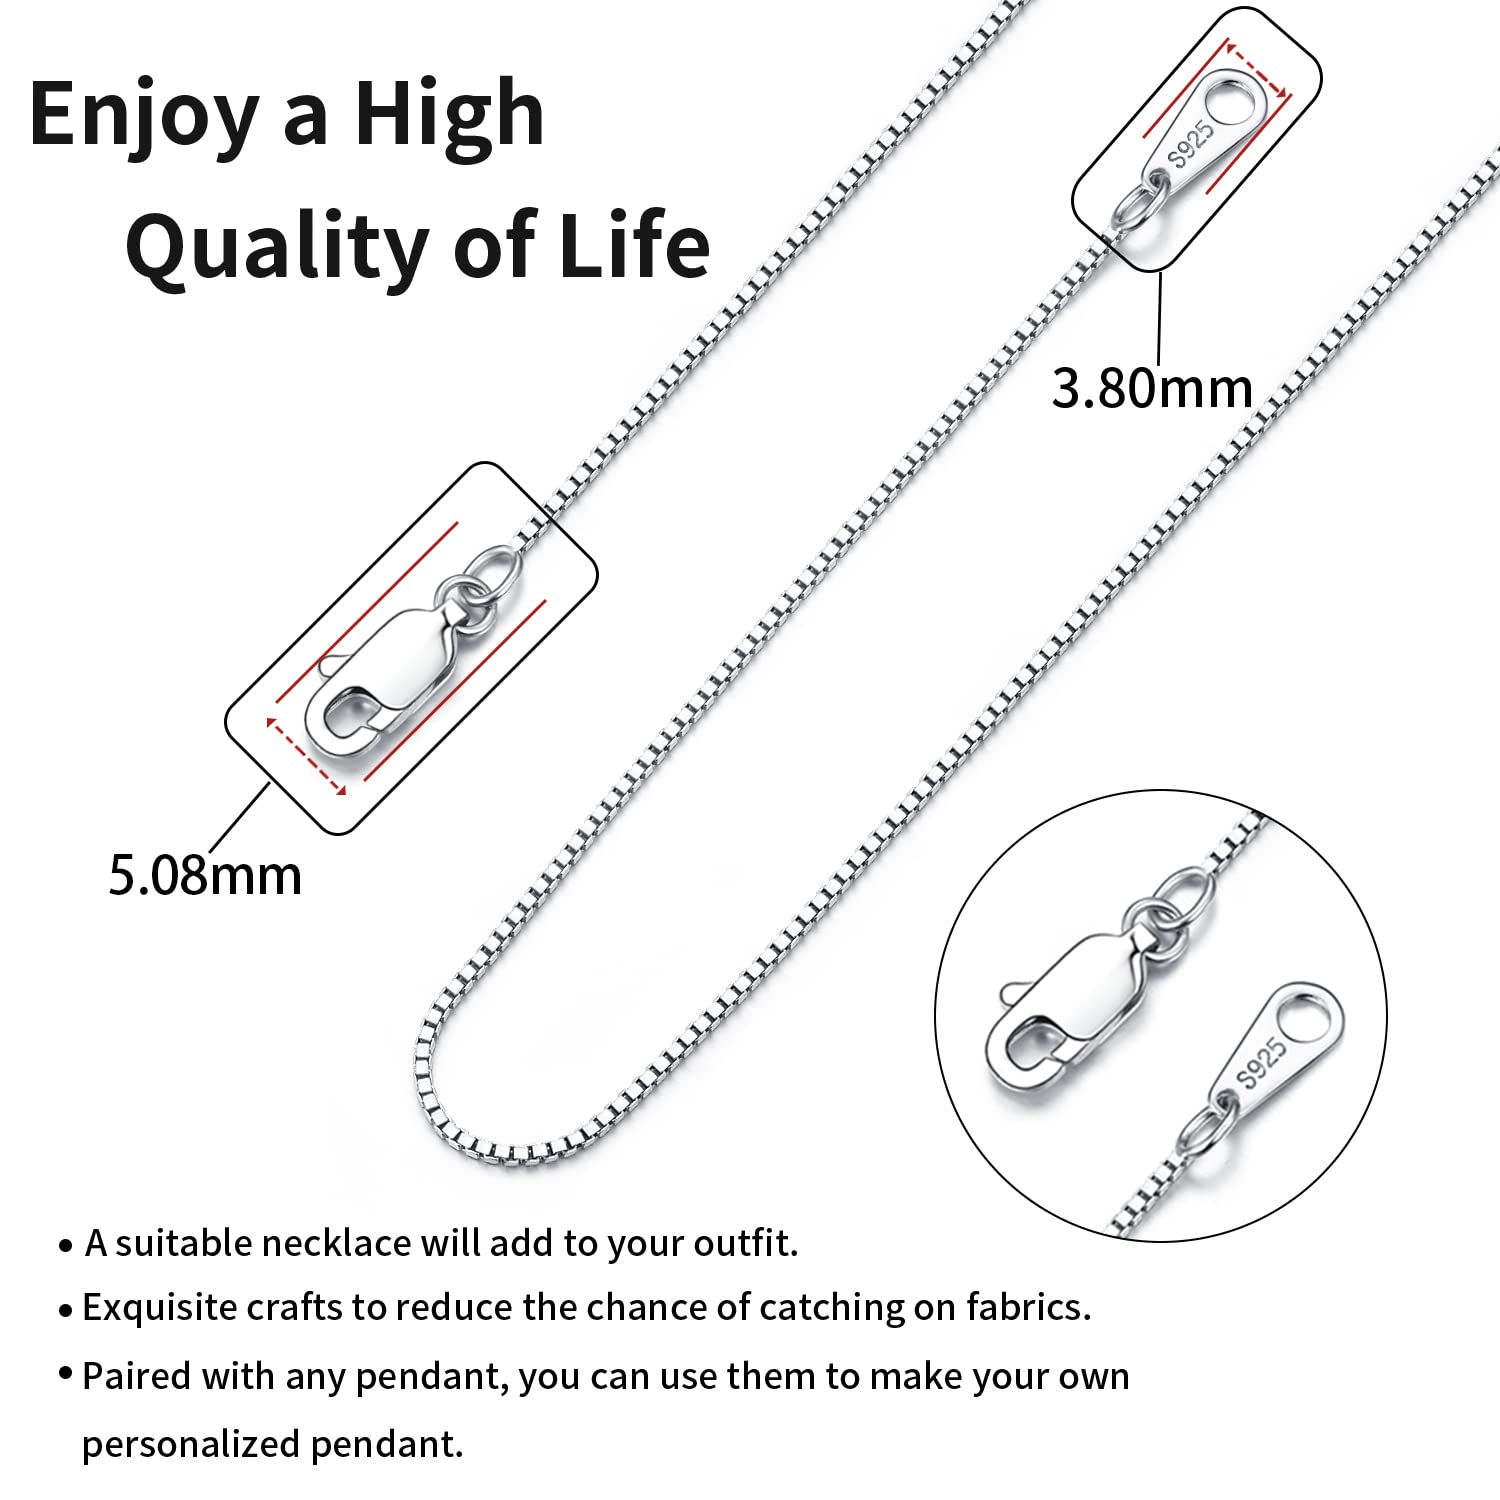 Jewlpire Solid 18K Over 925 Sterling Silver Chain Necklace for Women Girls, 0.8mm Box Chain Lobster Claw Clasp-Super Thin & Strong Necklace Chain 16/18/20/22/24 Inch